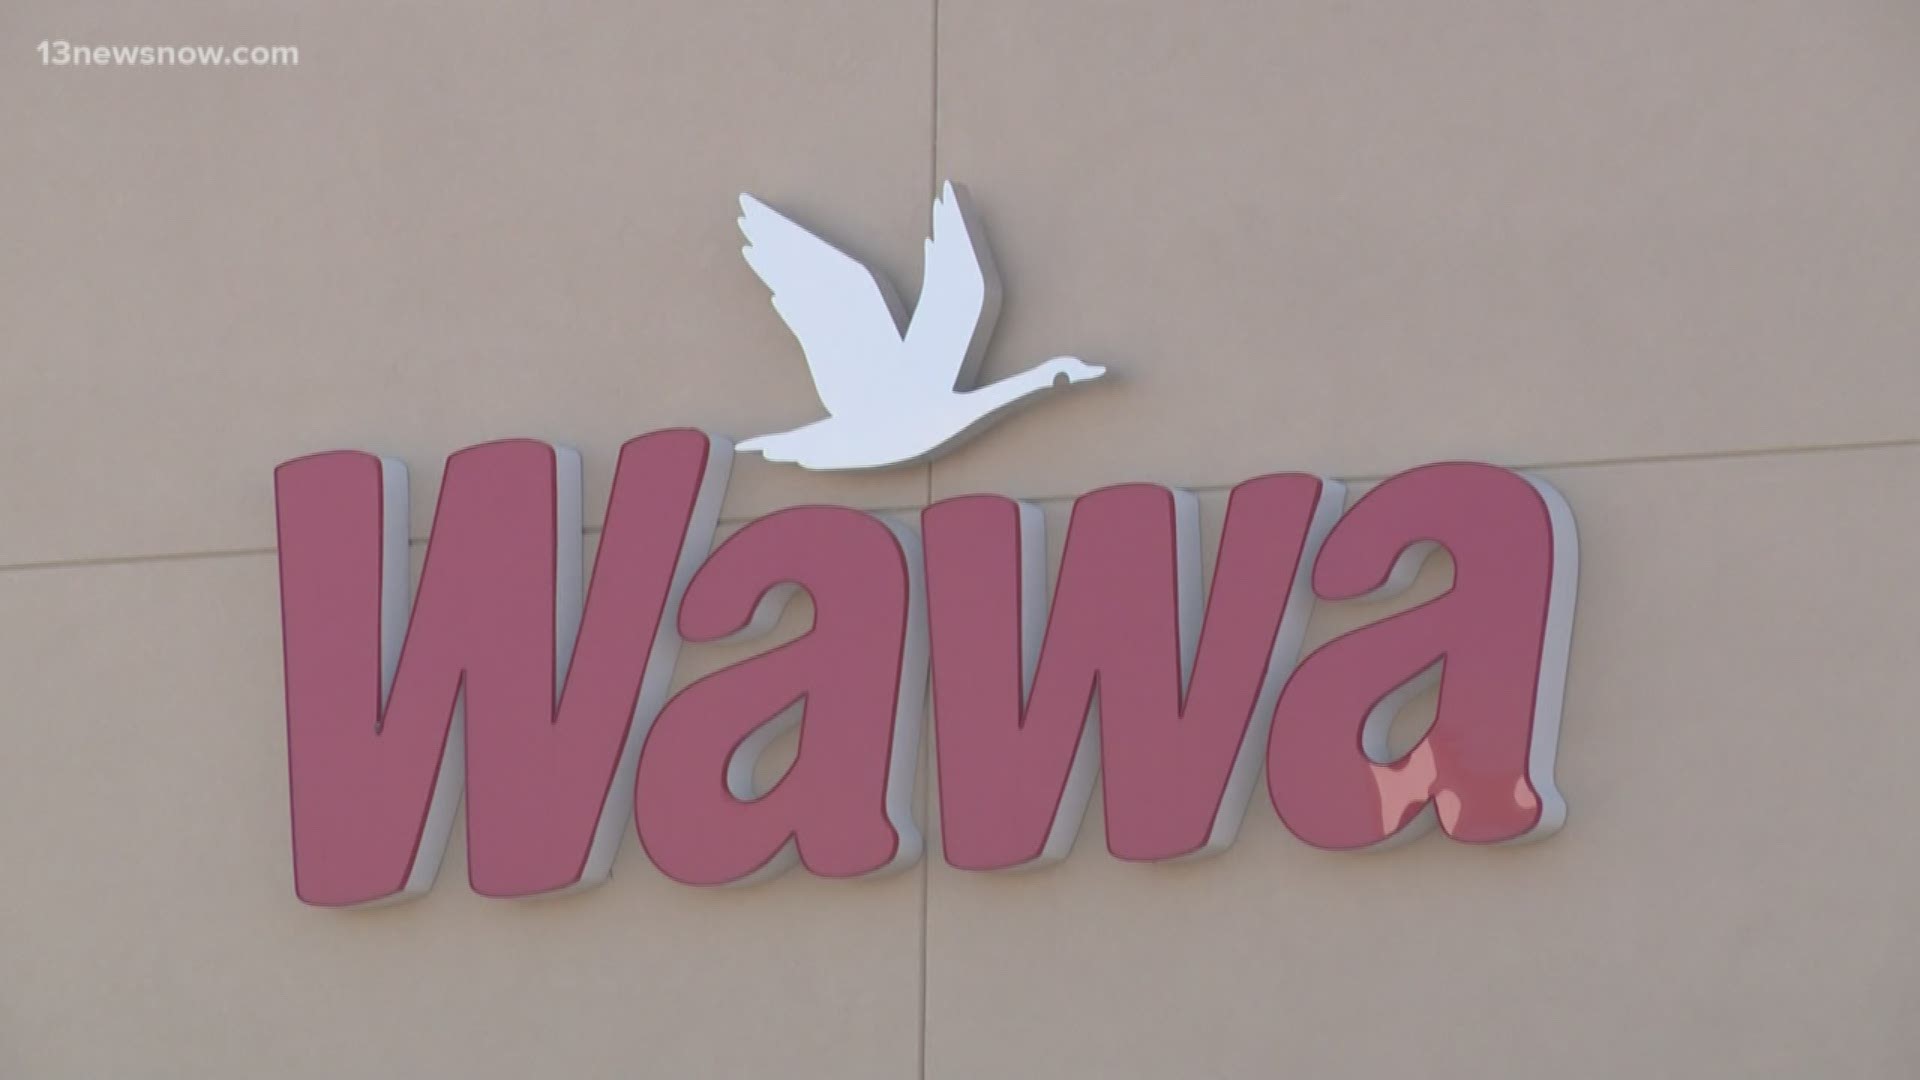 Wawa will open its first location in the state on the Outer Banks in Kill Devil at 8 a.m. Thursday.